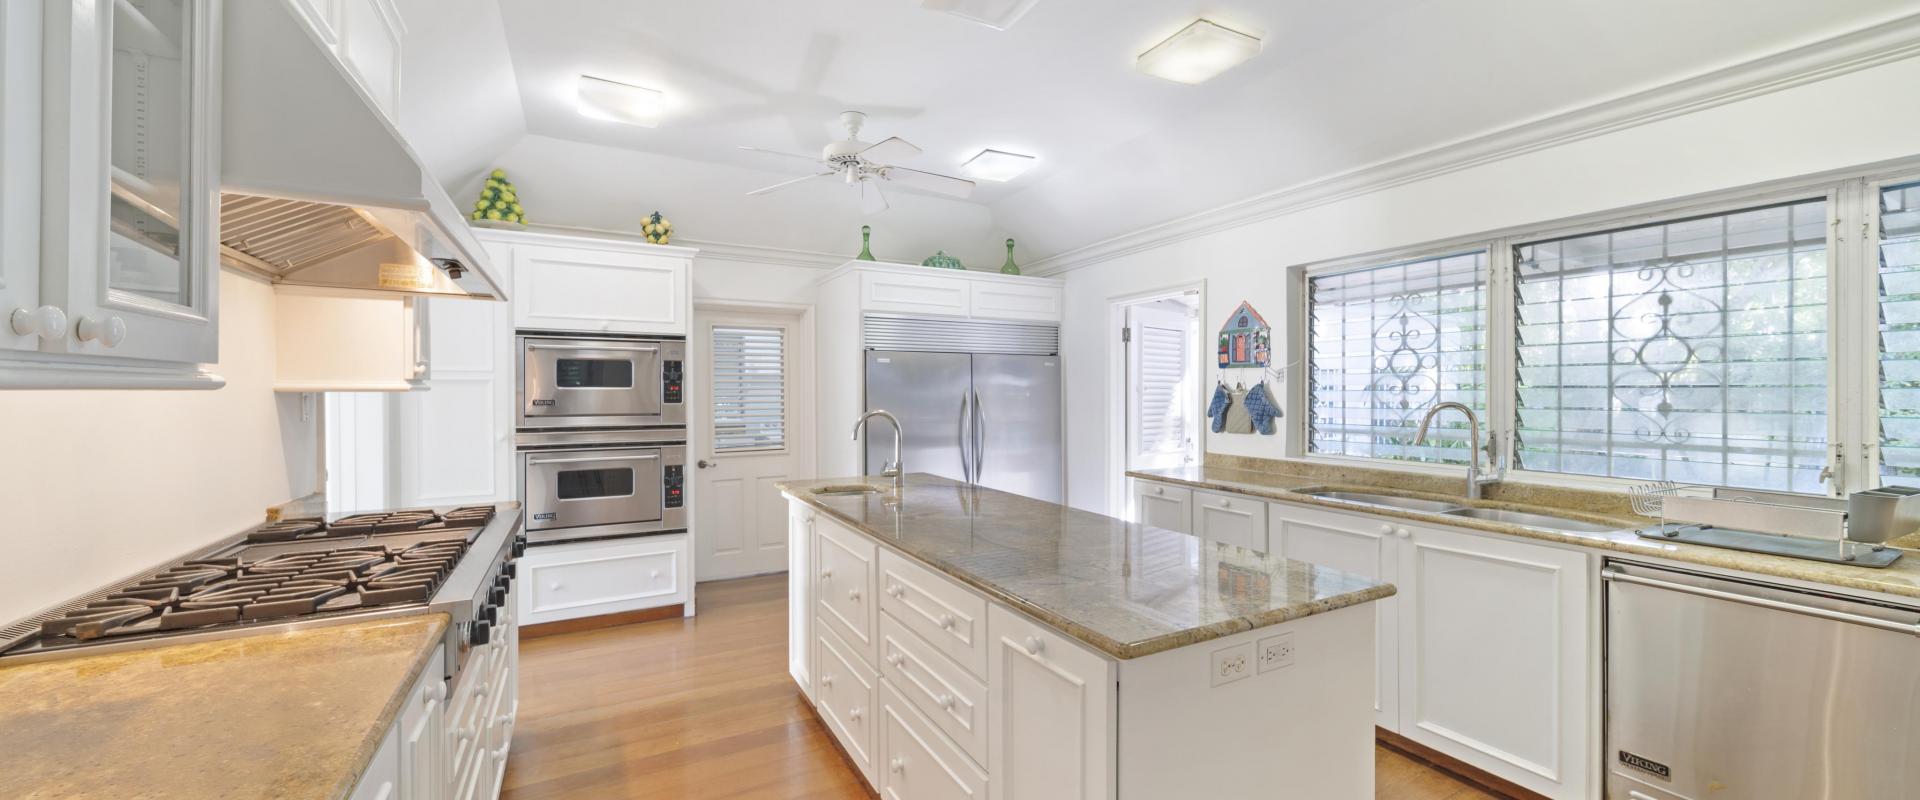 Heronetta Sandy Lane Estate Barbados Kitchen With Full Stainless Steel Appliances and Island